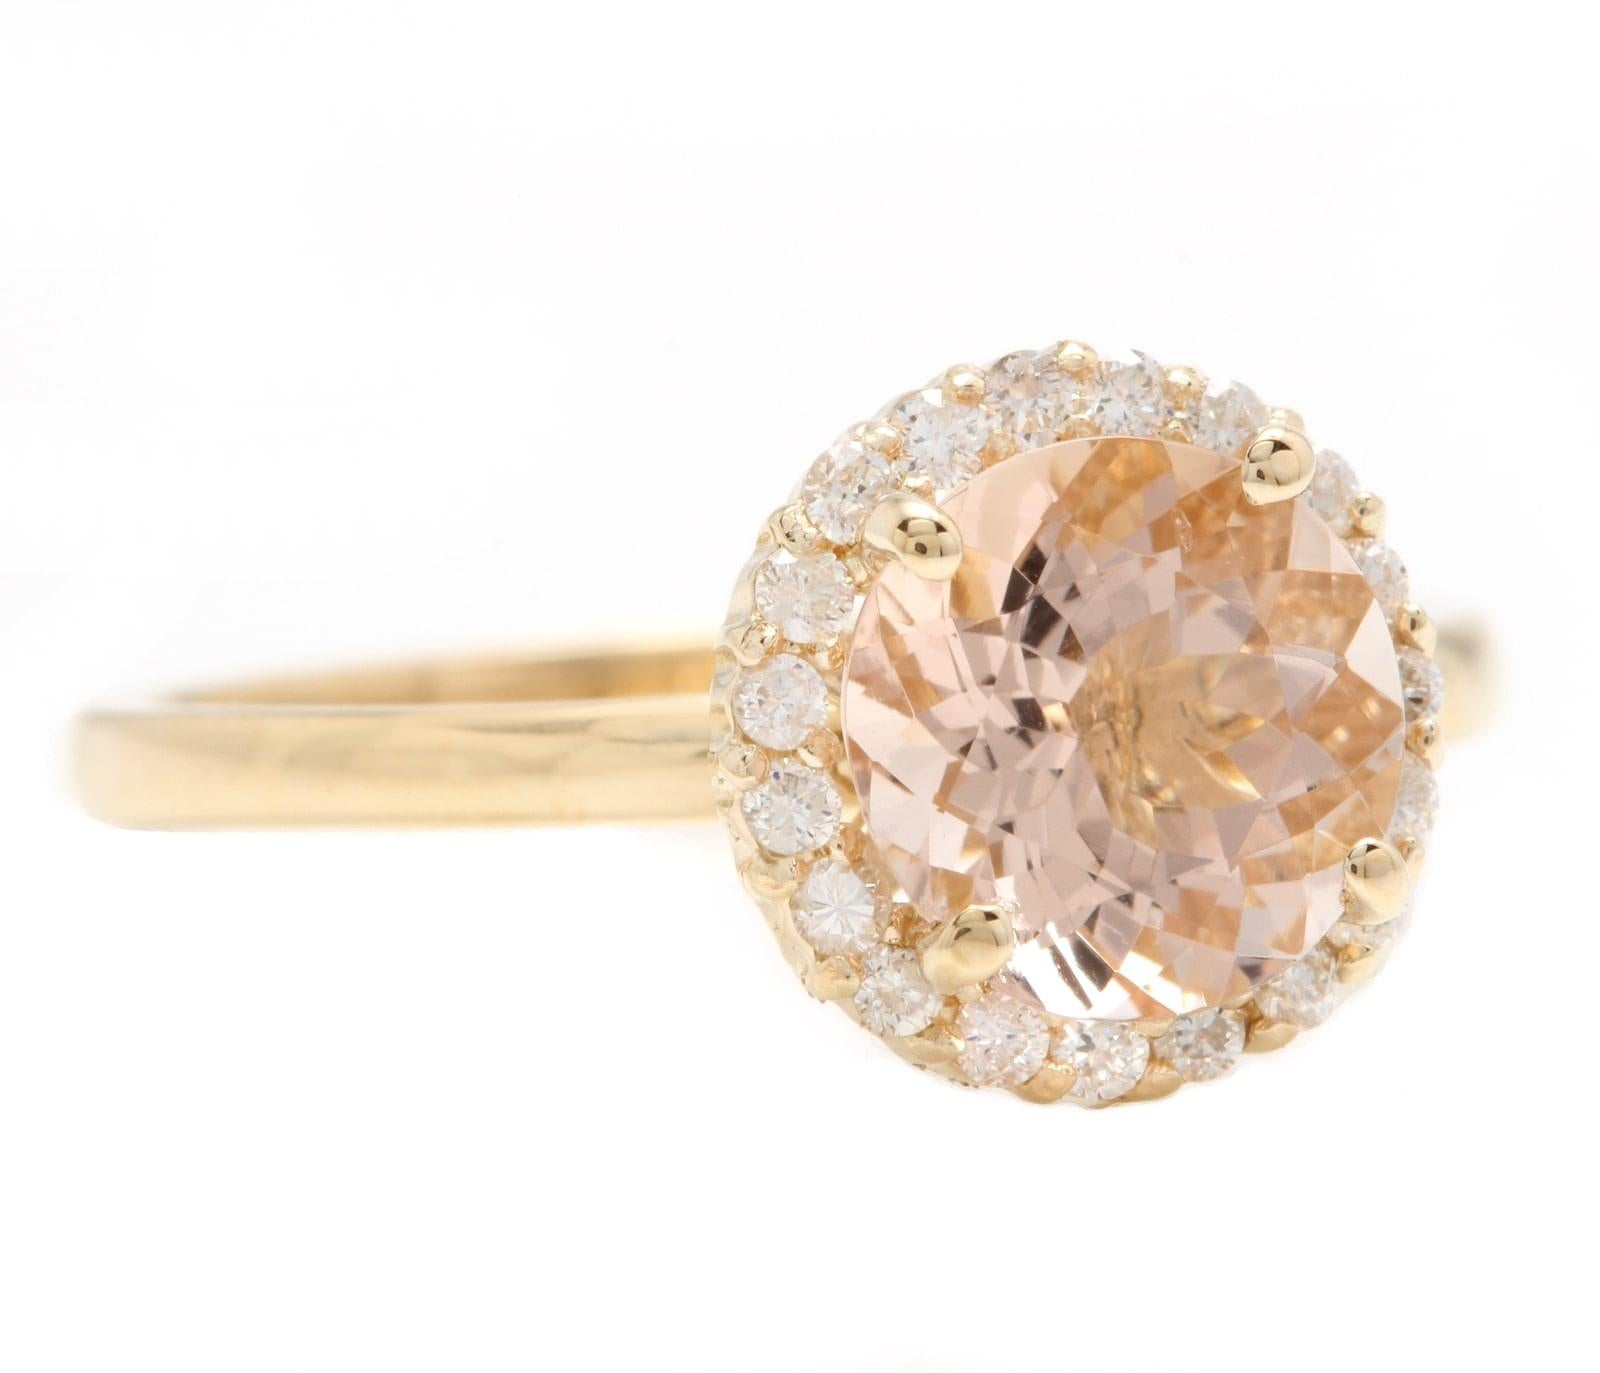 2.25 Carats Natural Morganite and Diamond 14K Solid Yellow Gold Ring

Suggested Replacement Value:  $1,900.00

Total Natural Cushion Morganite Weights: Approx.  2.00 Carats 

Morganite Measures: Approx. 8.00mm

Natural Round Diamonds Weight: Approx.